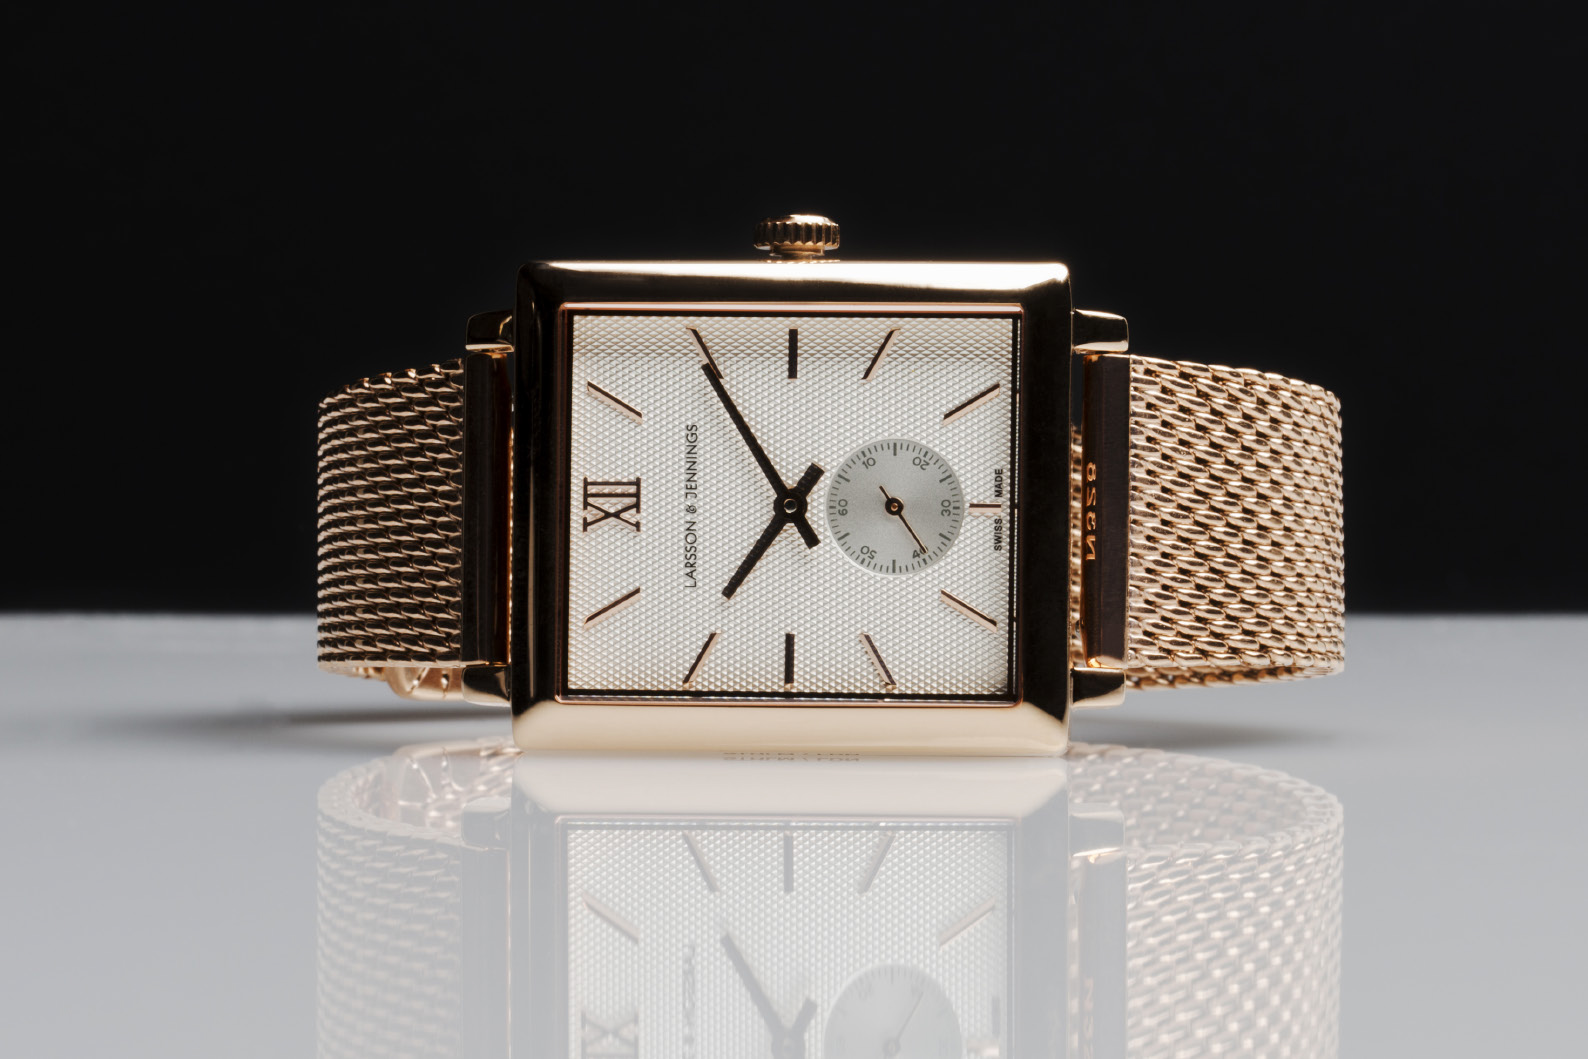 Larsson & jennings has produced a gold-coloured automatic with a square dial.